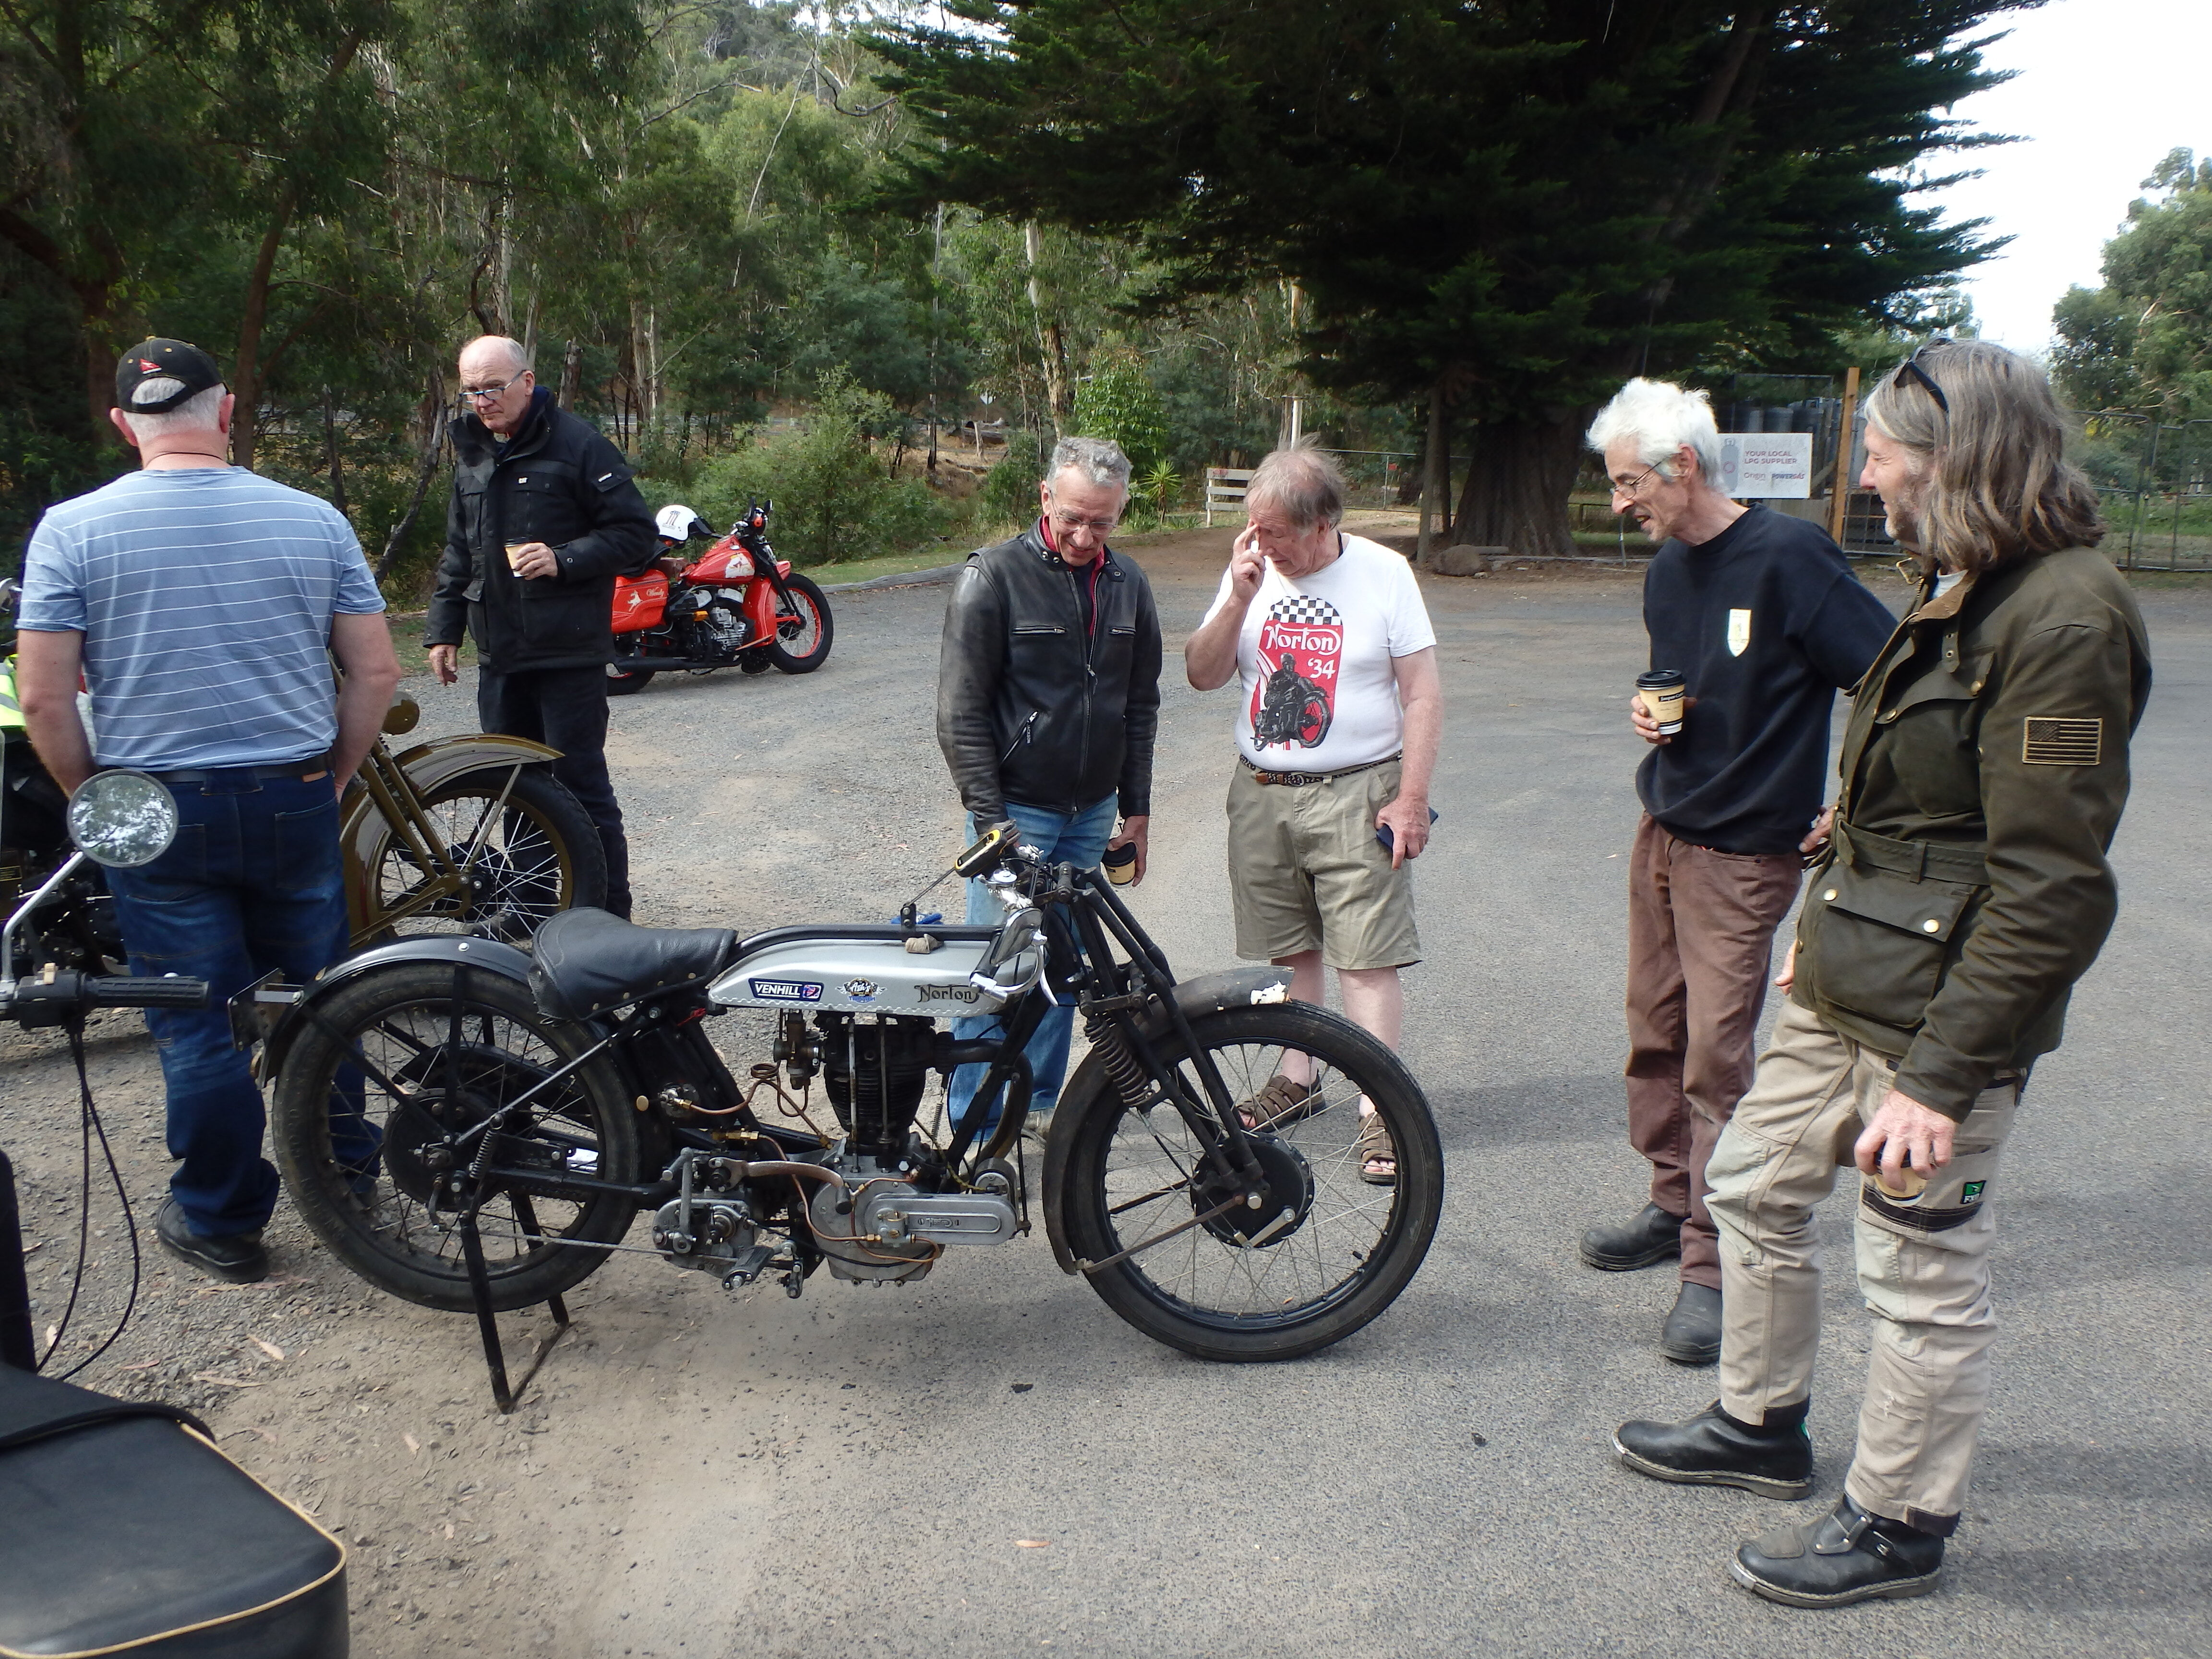 Paul and his Norton at Flowerdale